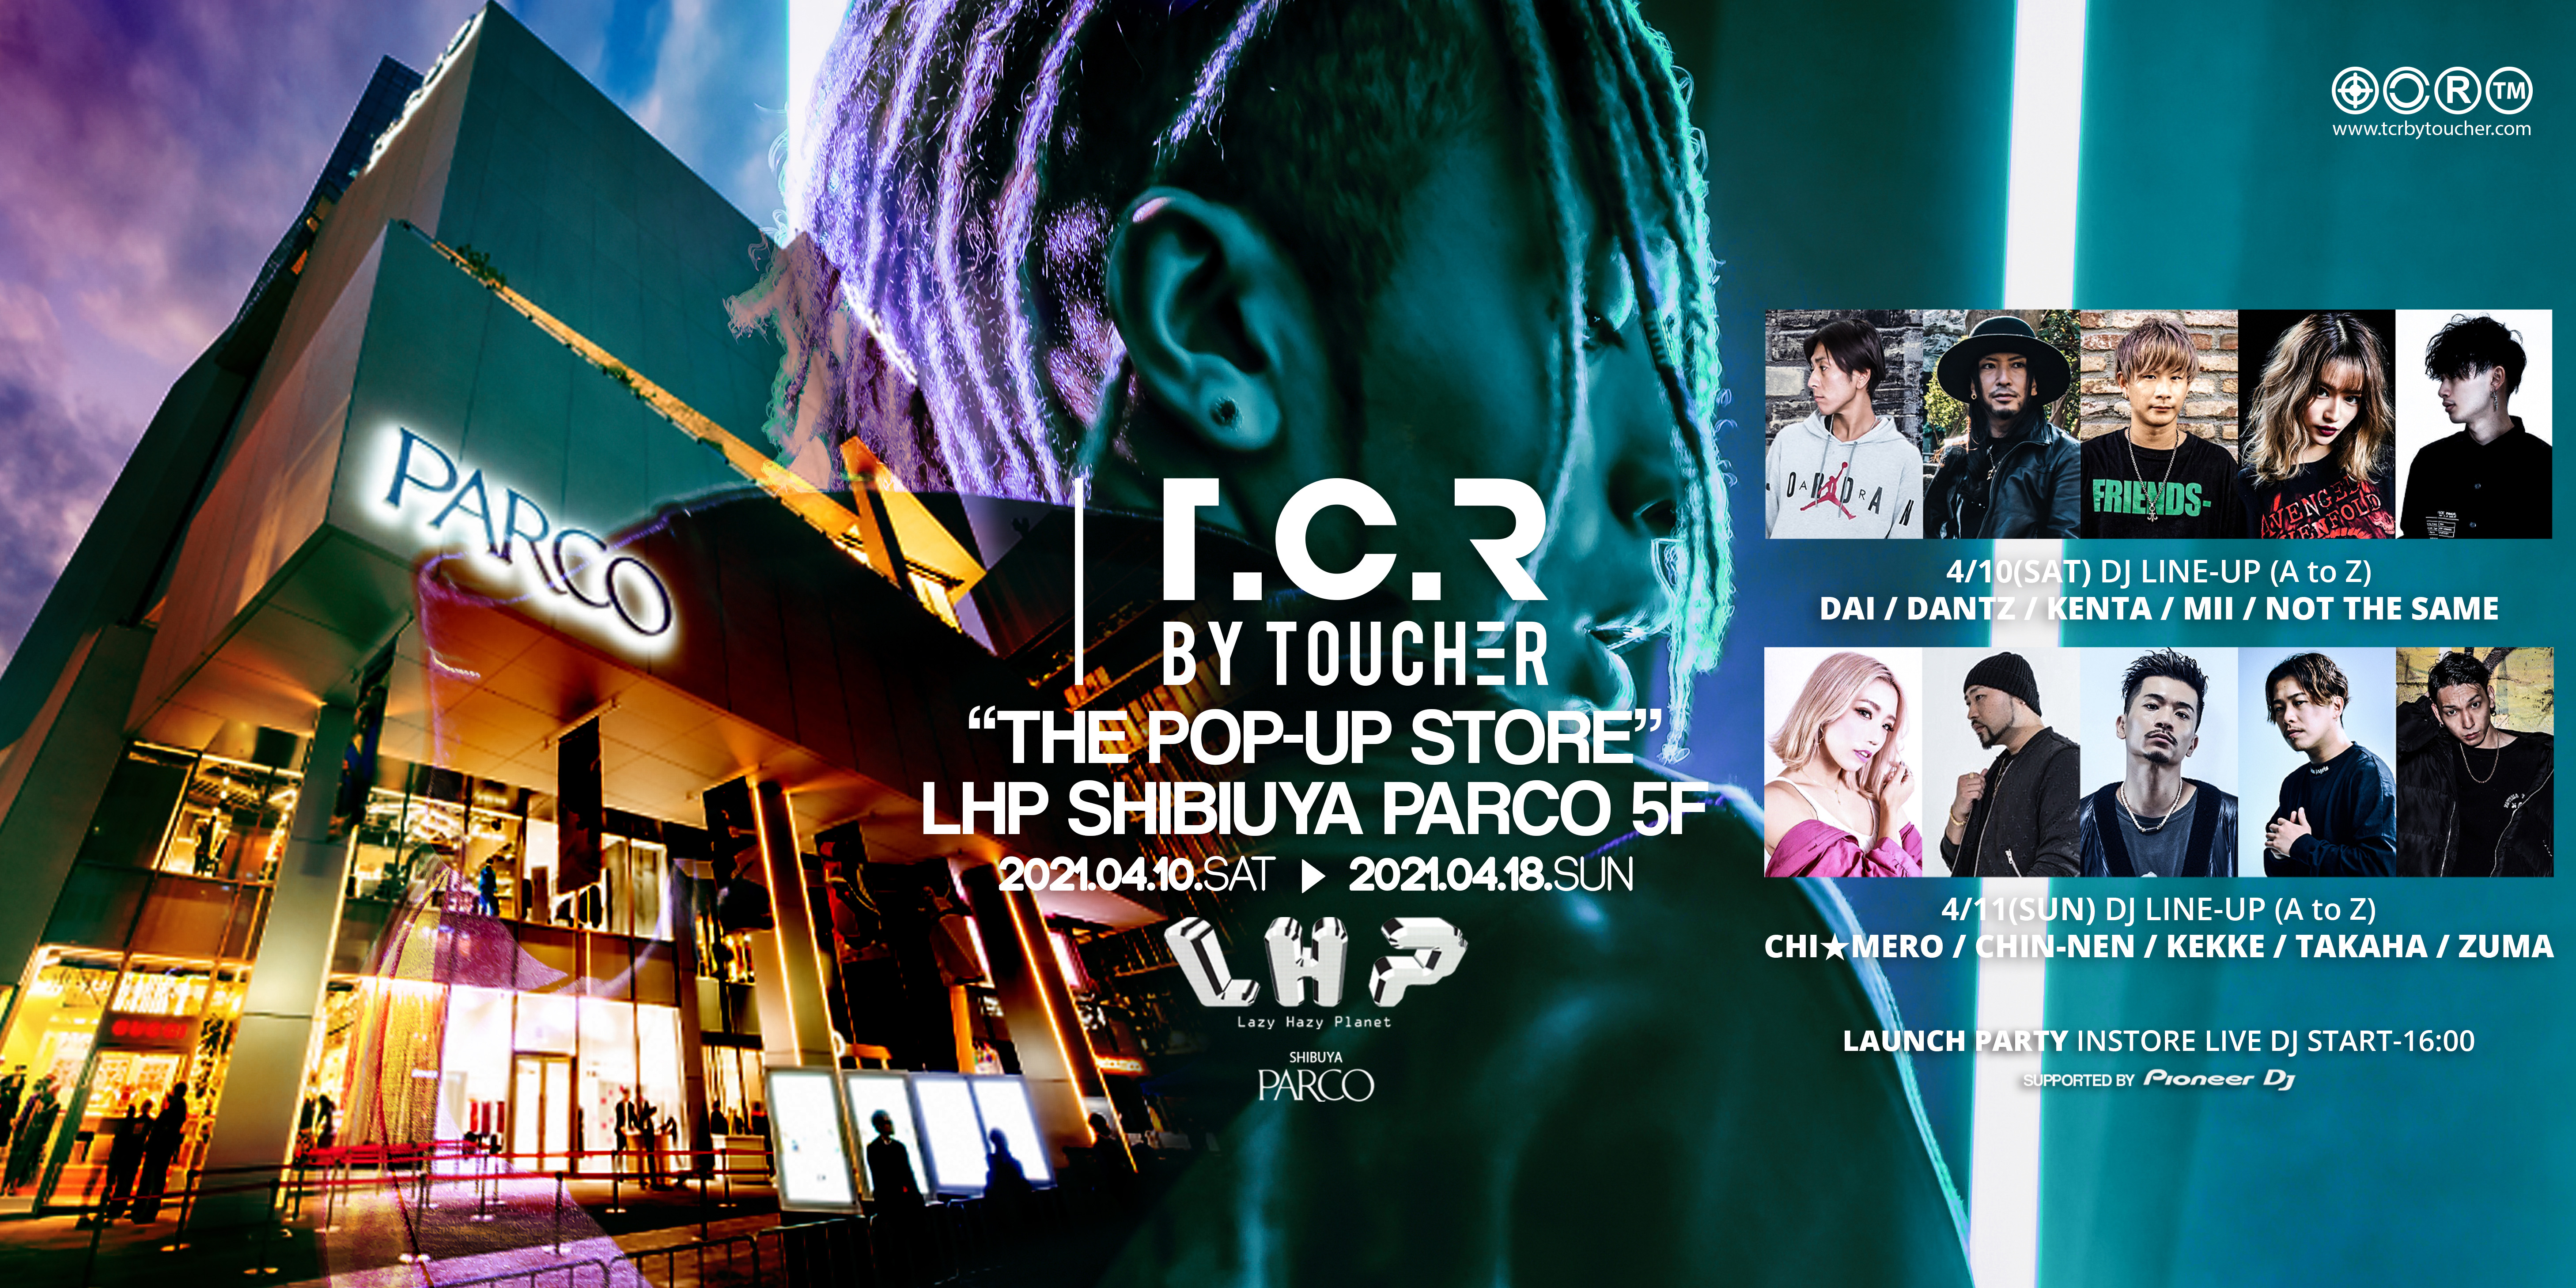 2021.04.10.SAT - THE POP-UP STORE LHP渋谷PARCO店にて開催